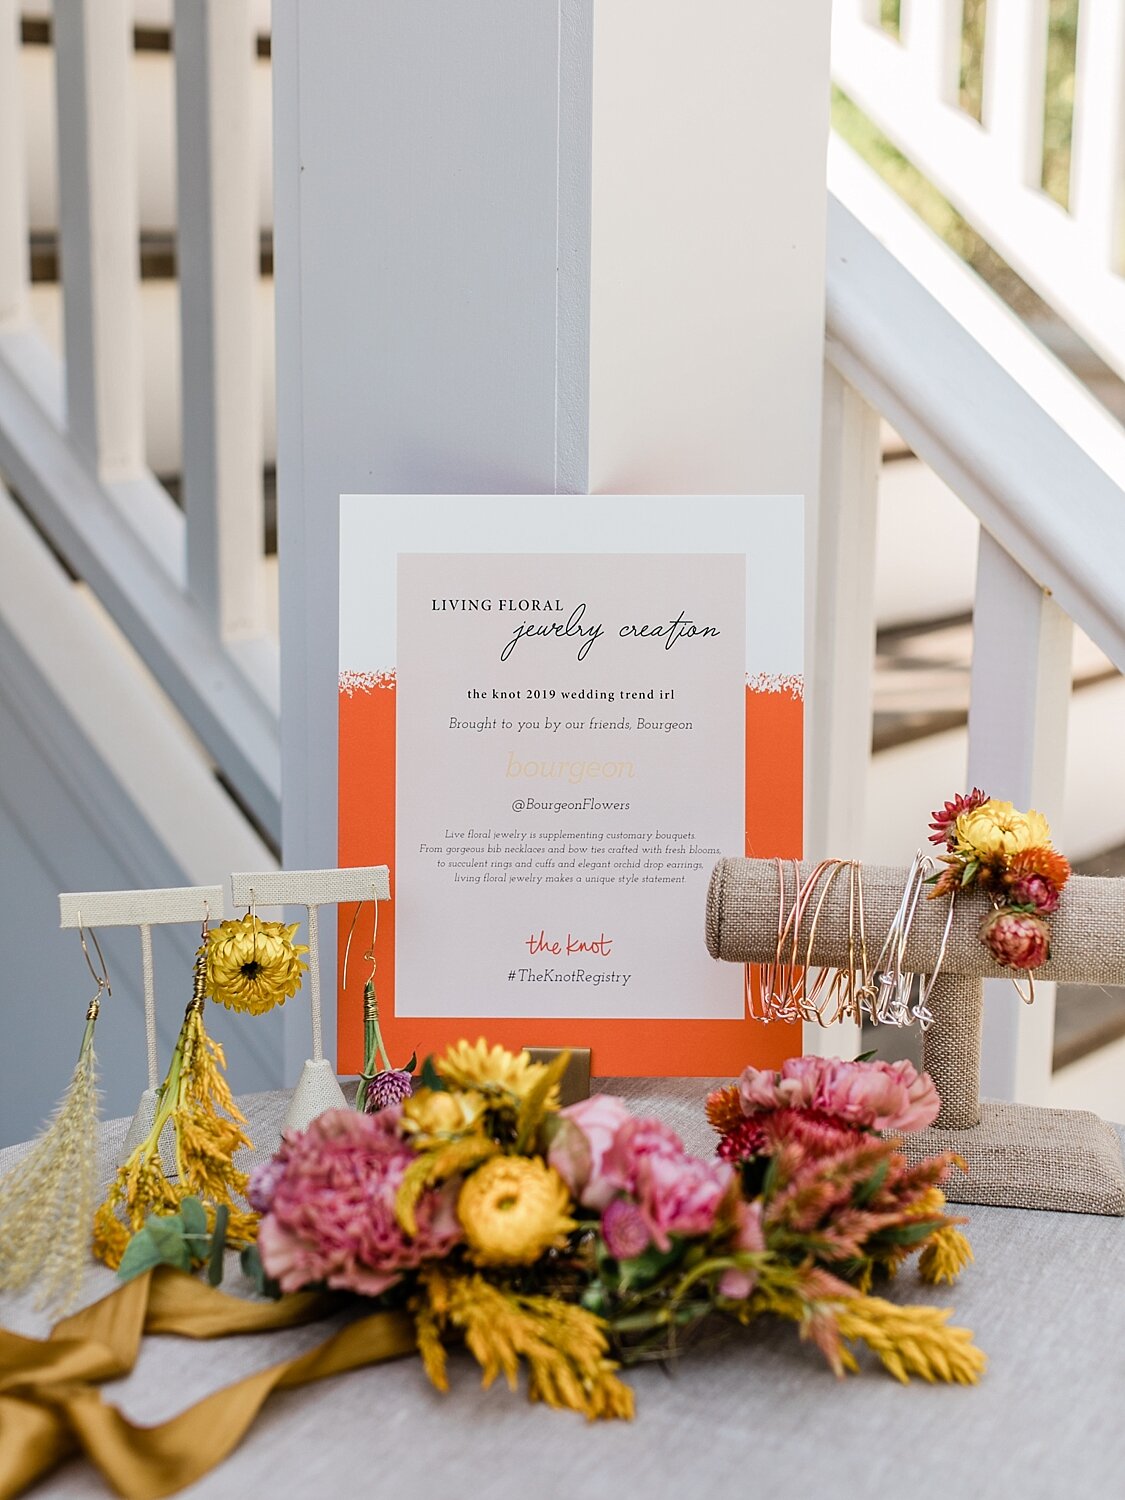 signs for registry event with The Knot and Bachelorette star Rachel Lindsay